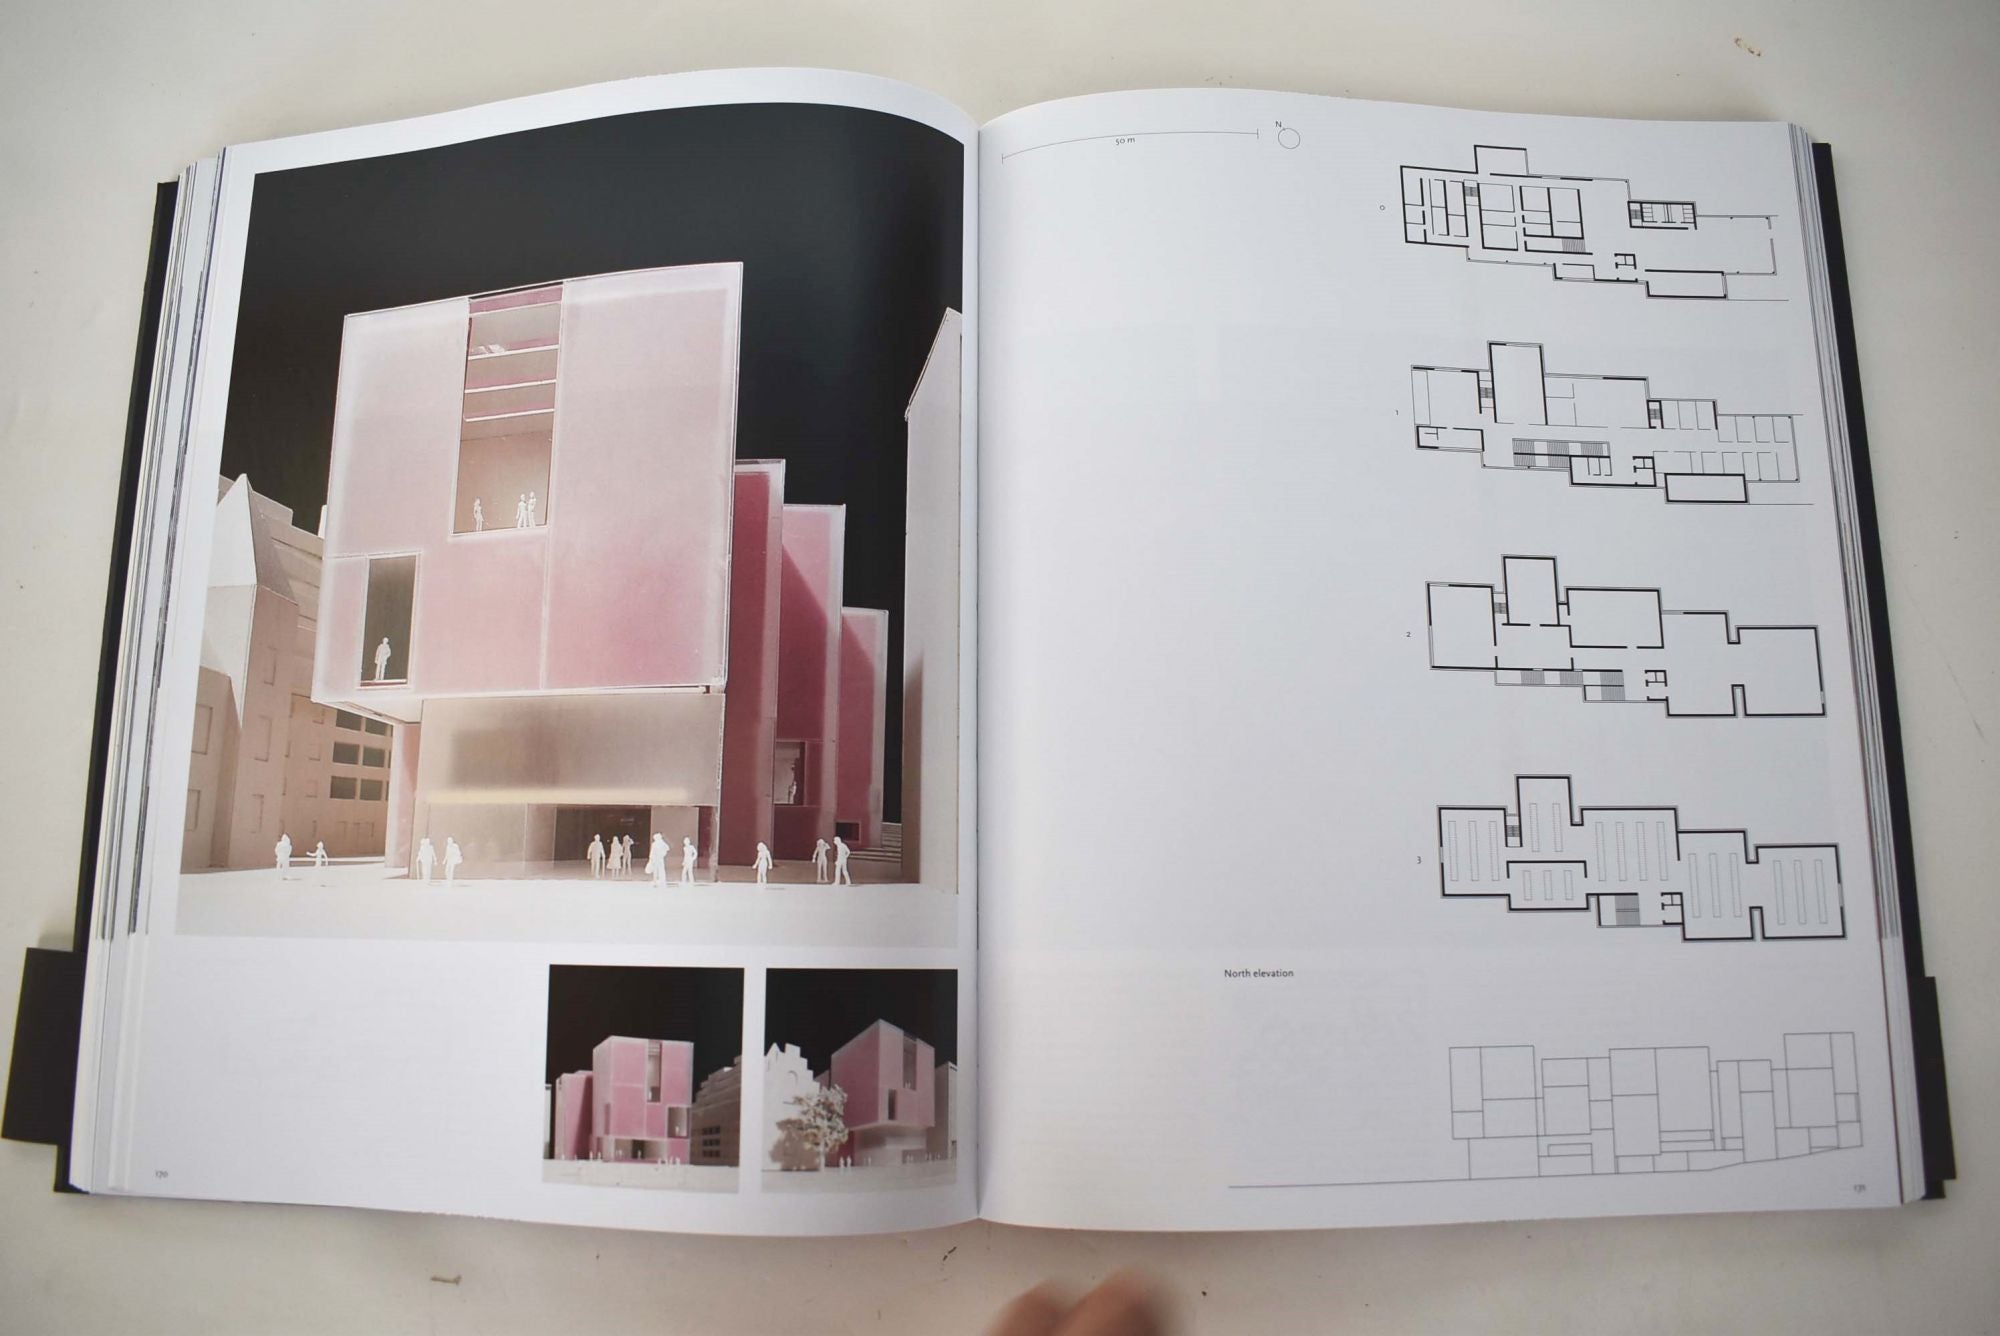 David Chipperfield: Architectural Works, 1990-2002 by Thomas Weaver on  Mullen Books